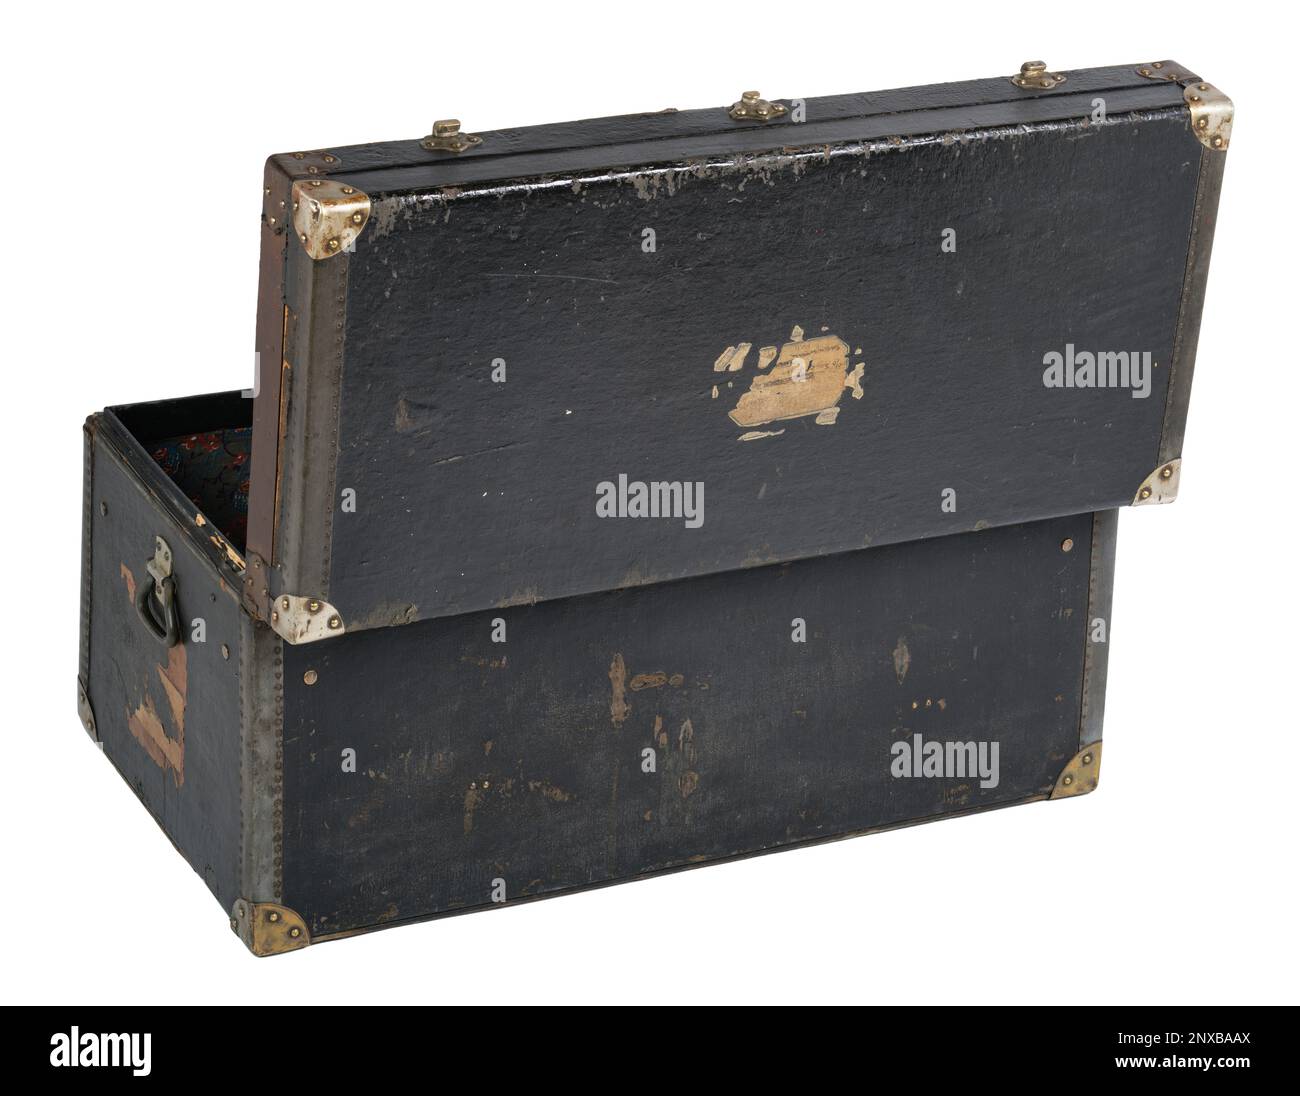 An old fashioned wooden trunk. A black trunk with metal reinforced corners and leather trimmed edges. Stock Photo